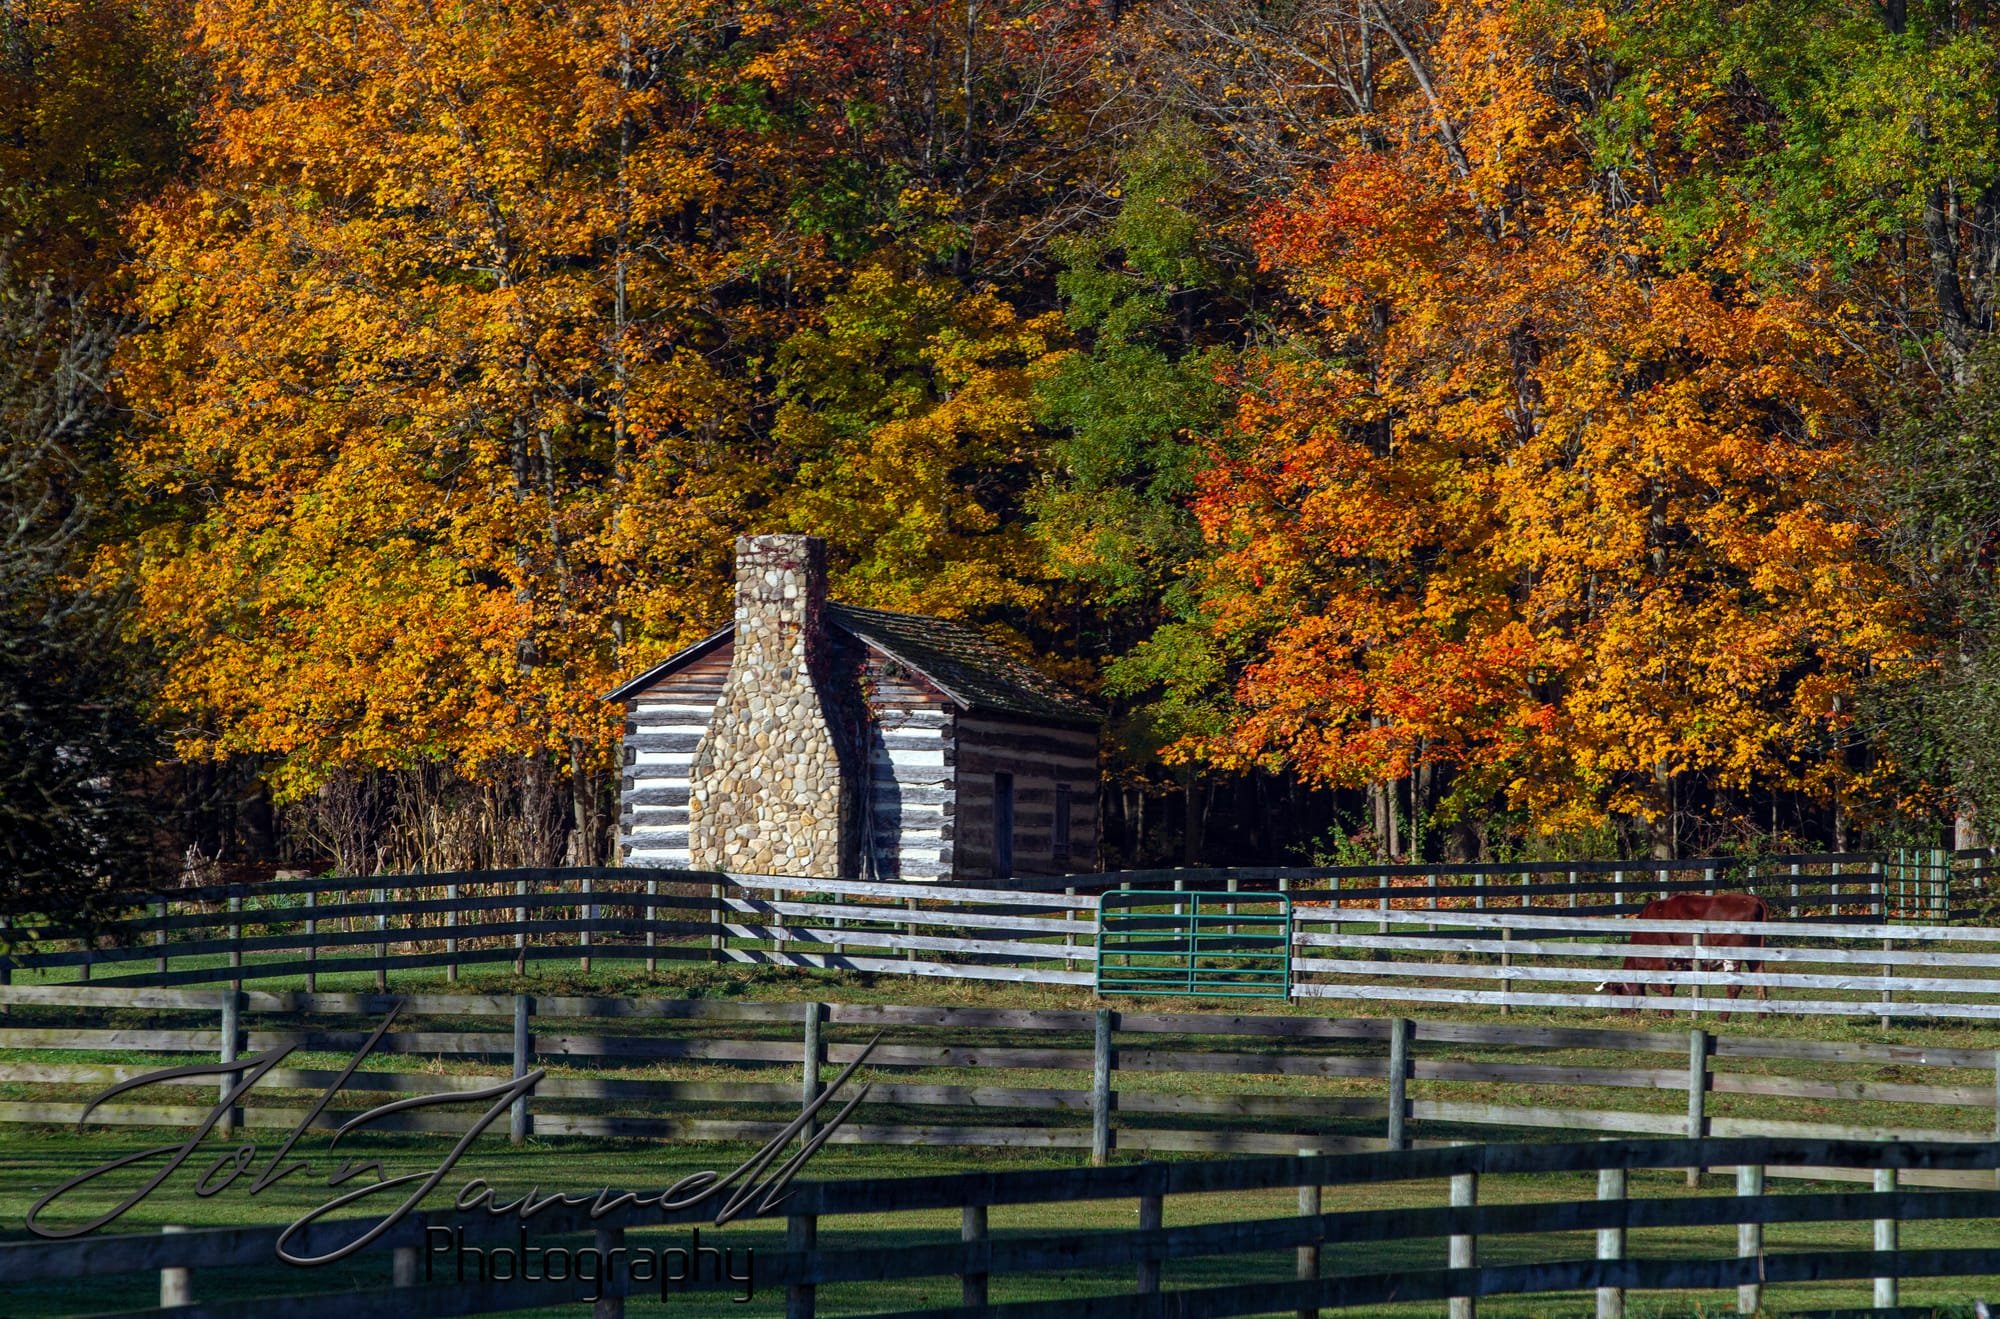 Hale Farm and Village in Fall